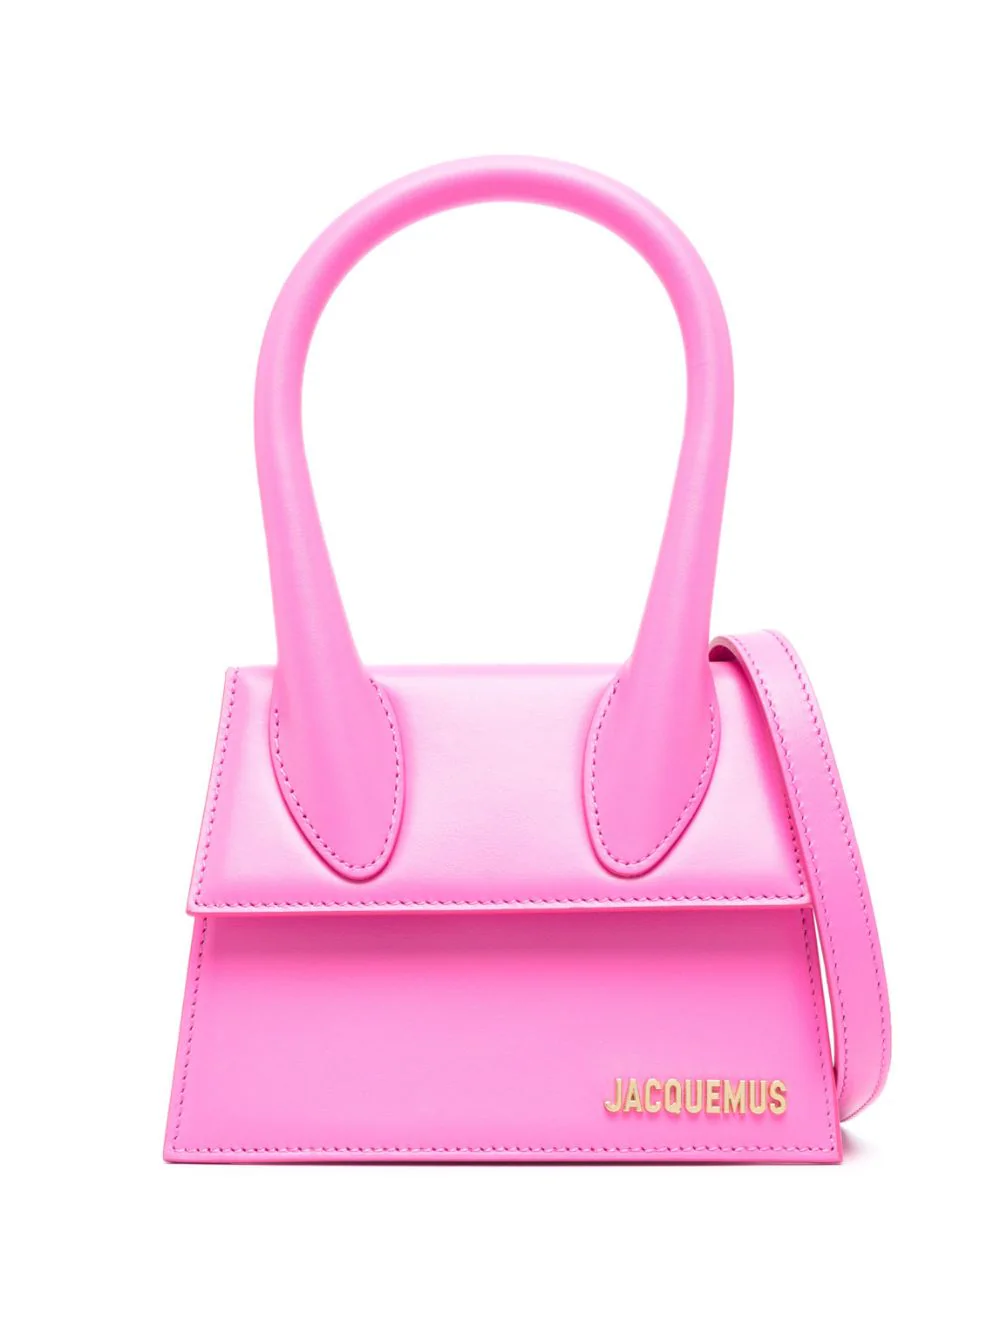 Jacquemus Le Chiquito Tote Bag In Pink & Purple